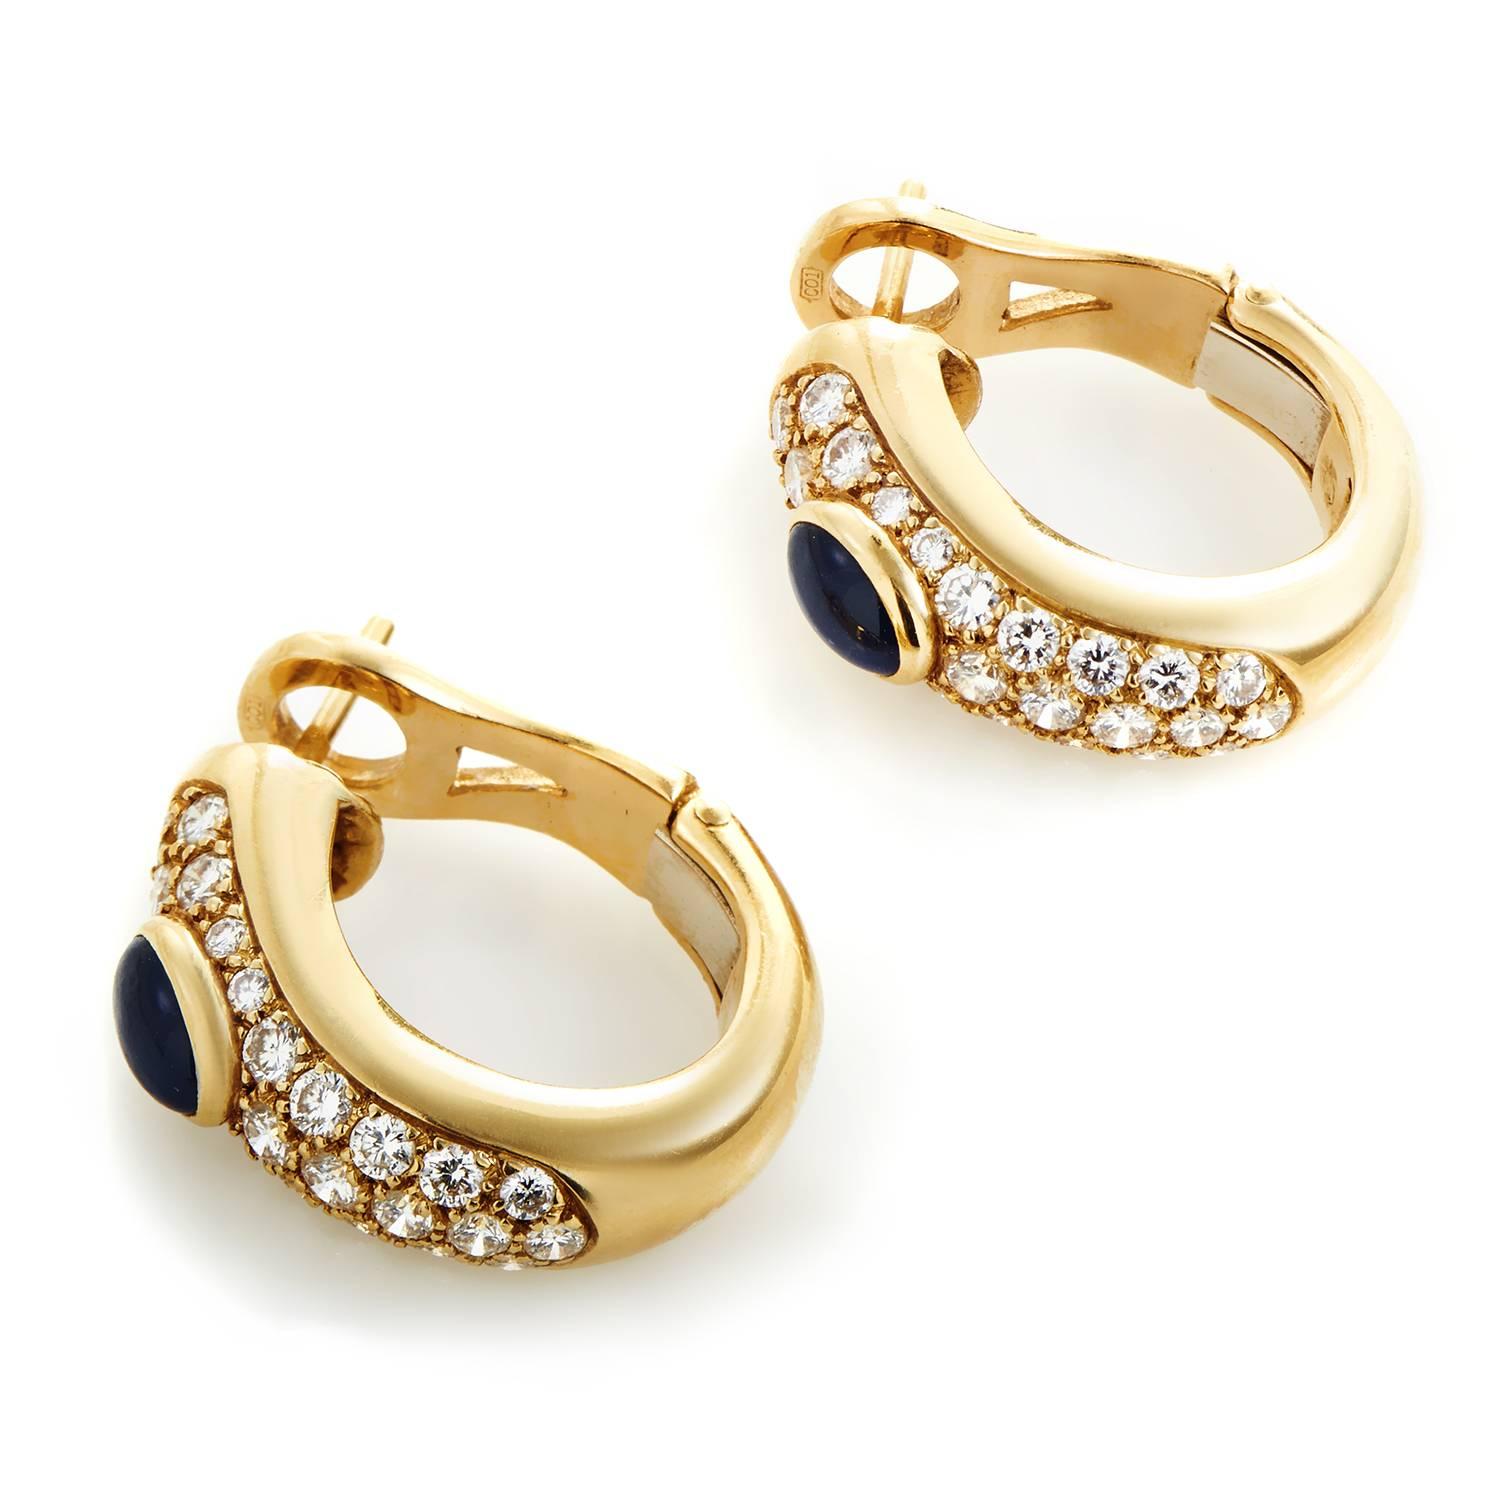 Exuding their magnificent appeal against mesmerizing arrangements of scintillating diamonds weighing in total 1.35 carats, the regal sapphires create an irresistible sight in these graceful 18K yellow gold earrings from Cartier.
Included Items: